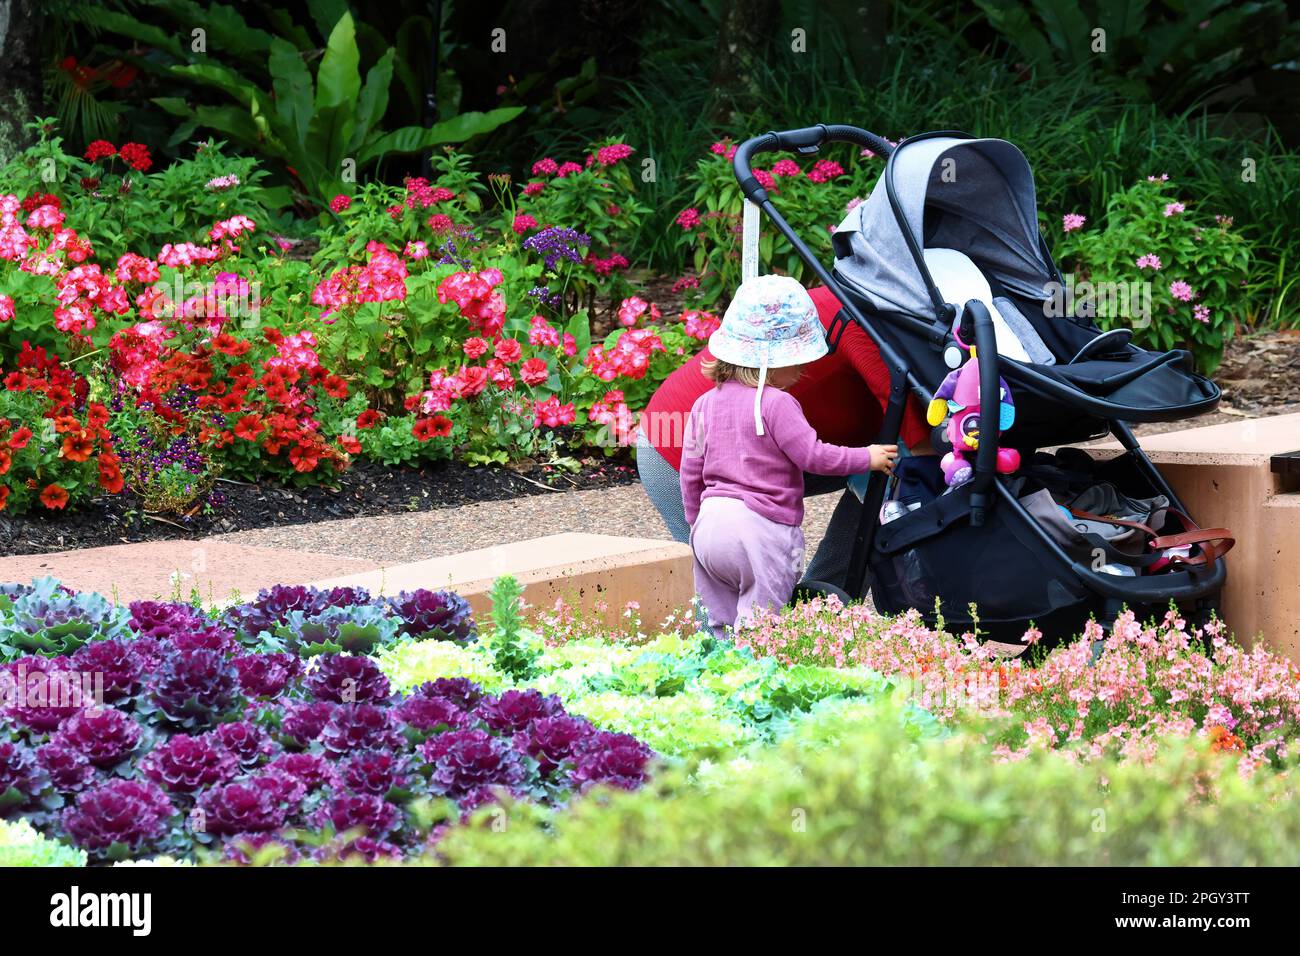 Photo of people doing things at the park together. mum and kid with stroller at the gardens. Stock Photo